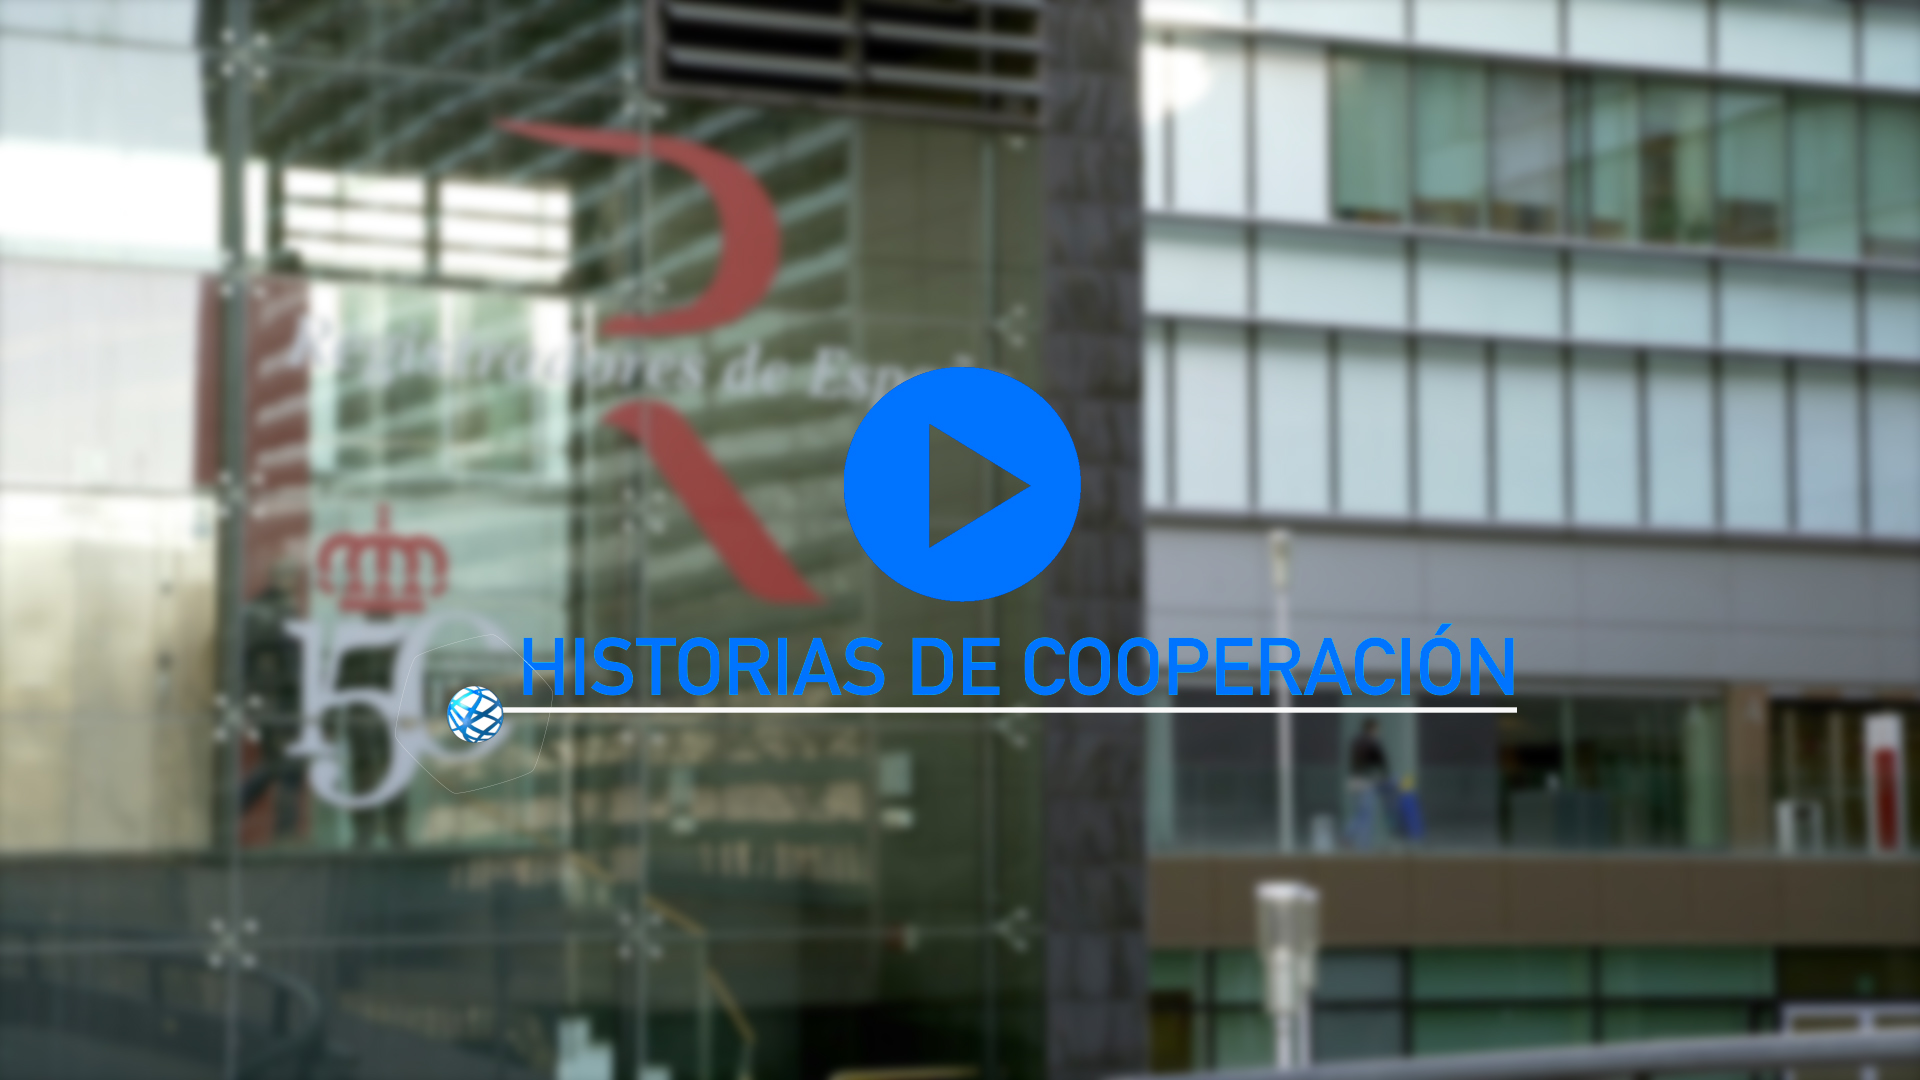 Cooperation stories: registers in Cuba